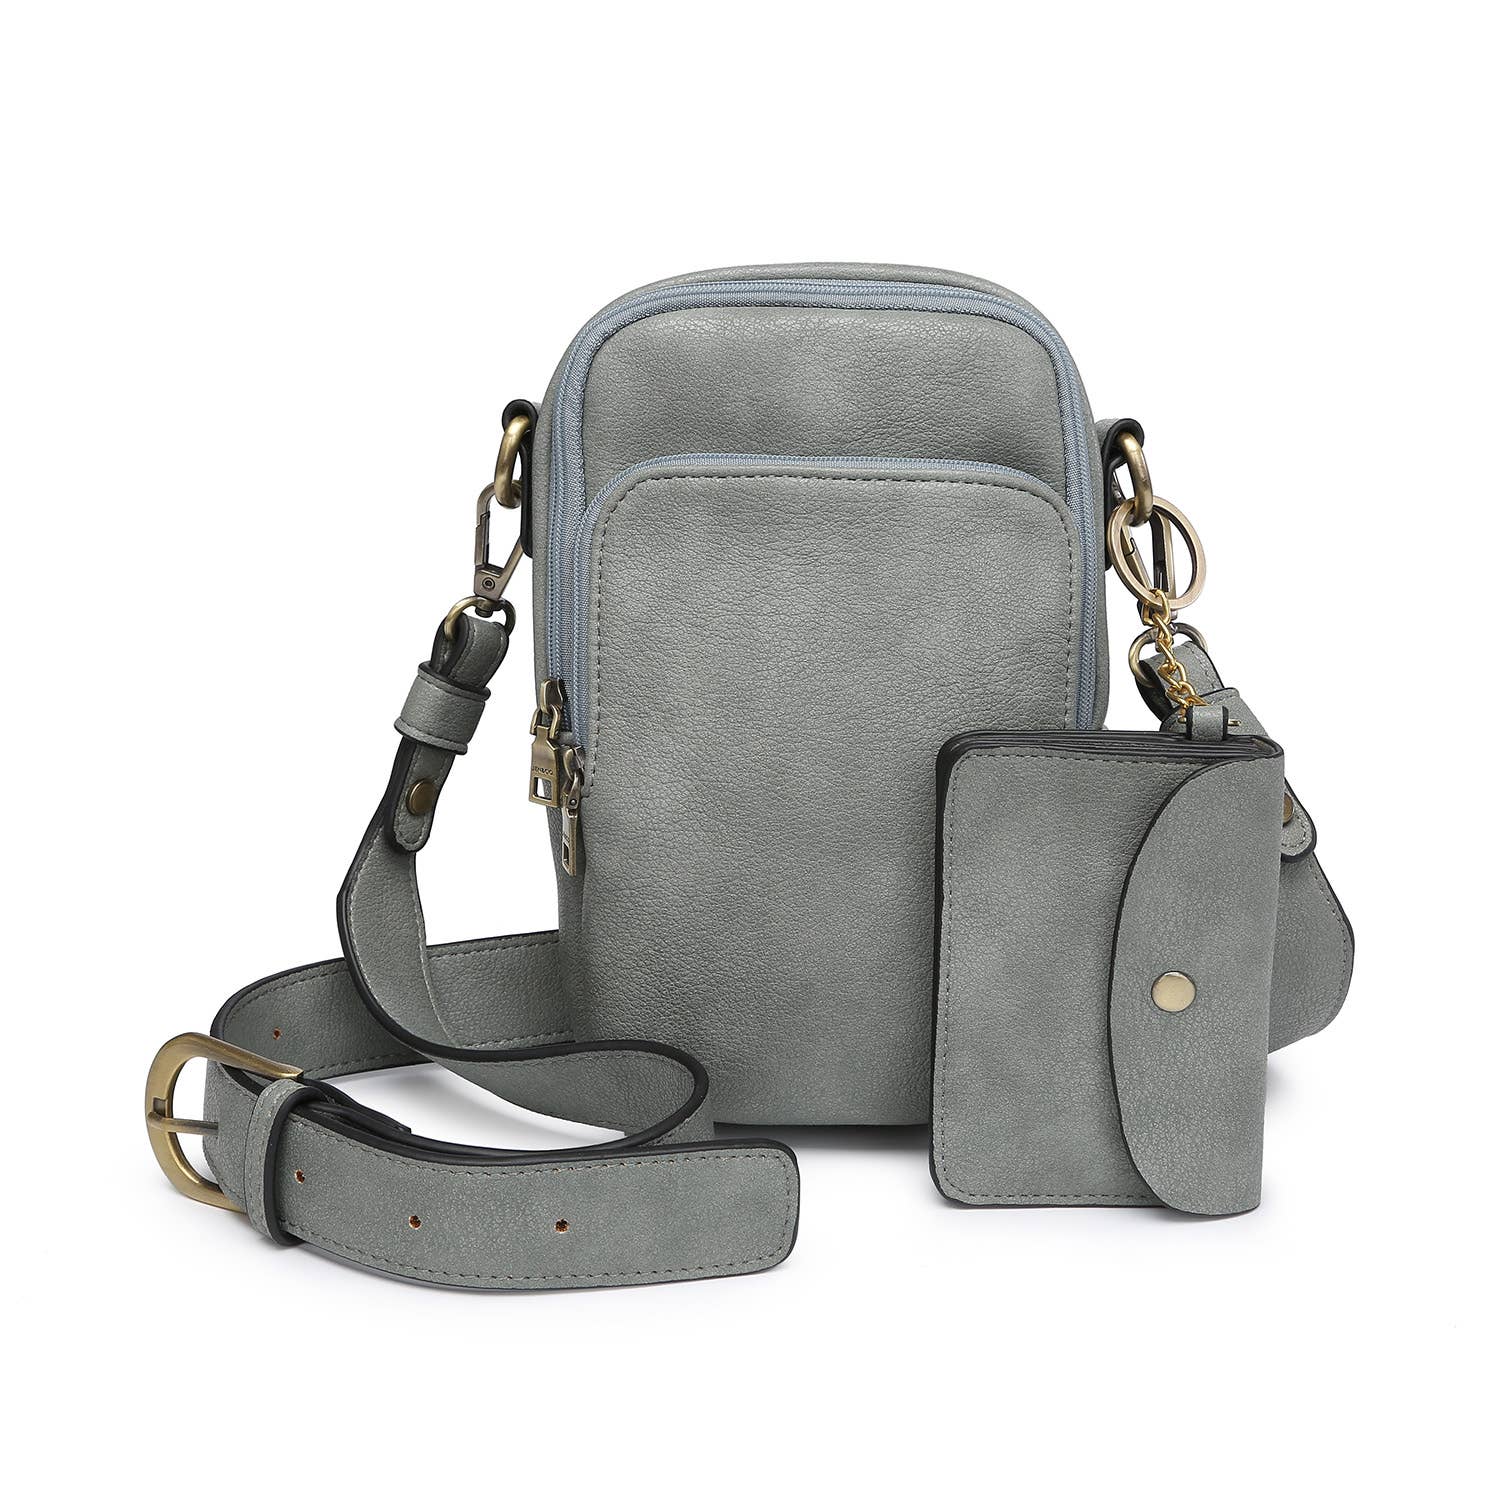 Parker Crossbody with Pouch-accessories > Apparel & Accessories > Handbags, Wallets & Cases > Handbags-Quinn's Mercantile